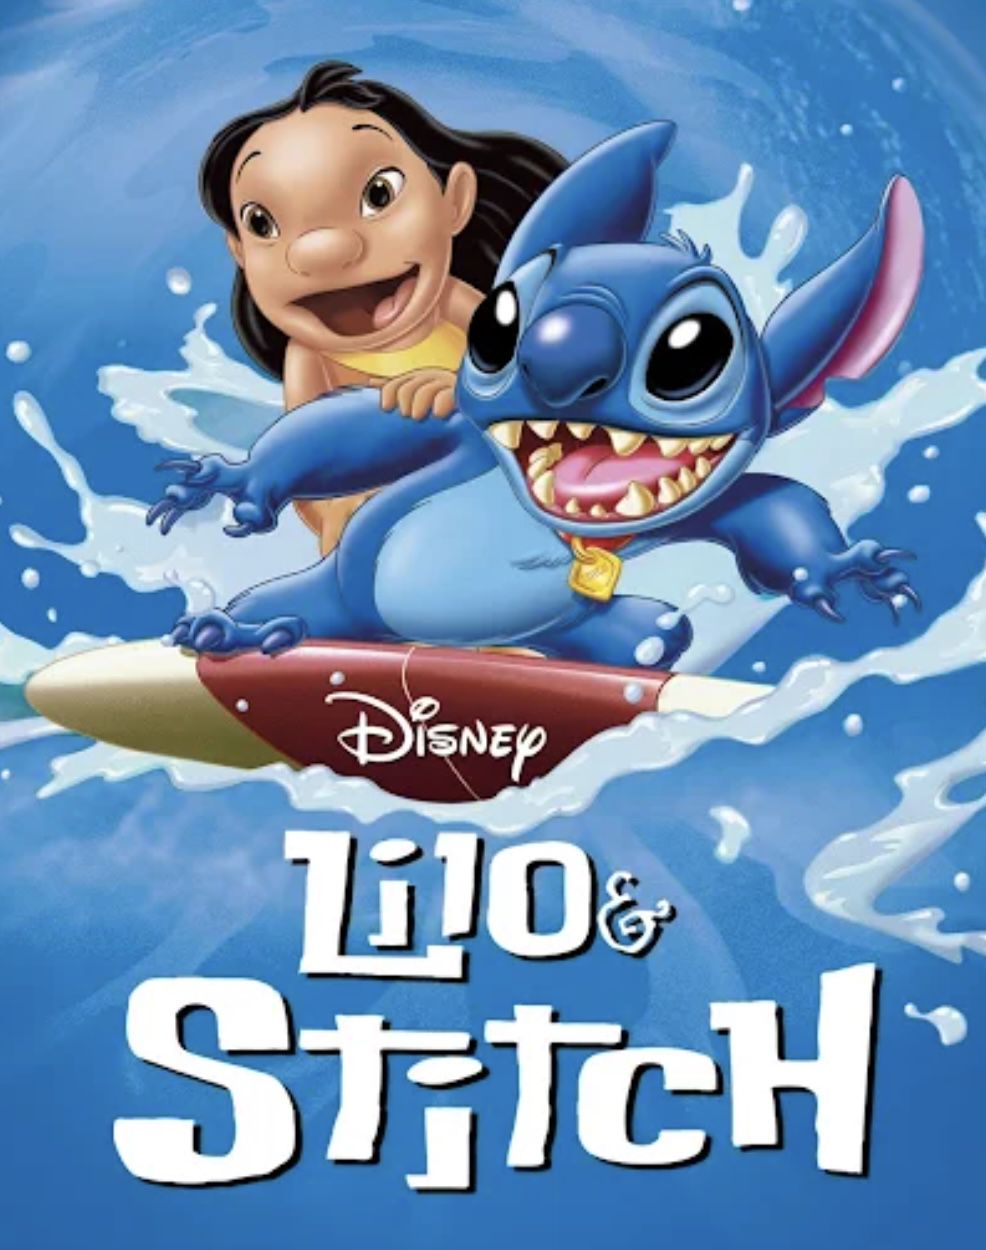 <p>Elvis starred in more than 30 movies, but the one that contains the highest number of his songs is the 2002 Disney movie “Lilo & Stitch.” That movie contains <a href="https://www.amazon.com/Lilo-Stitch-Various-artists/dp/B0157E48KQ">five original Elvis songs</a> and two Elvis songs performed by other artists.</p>